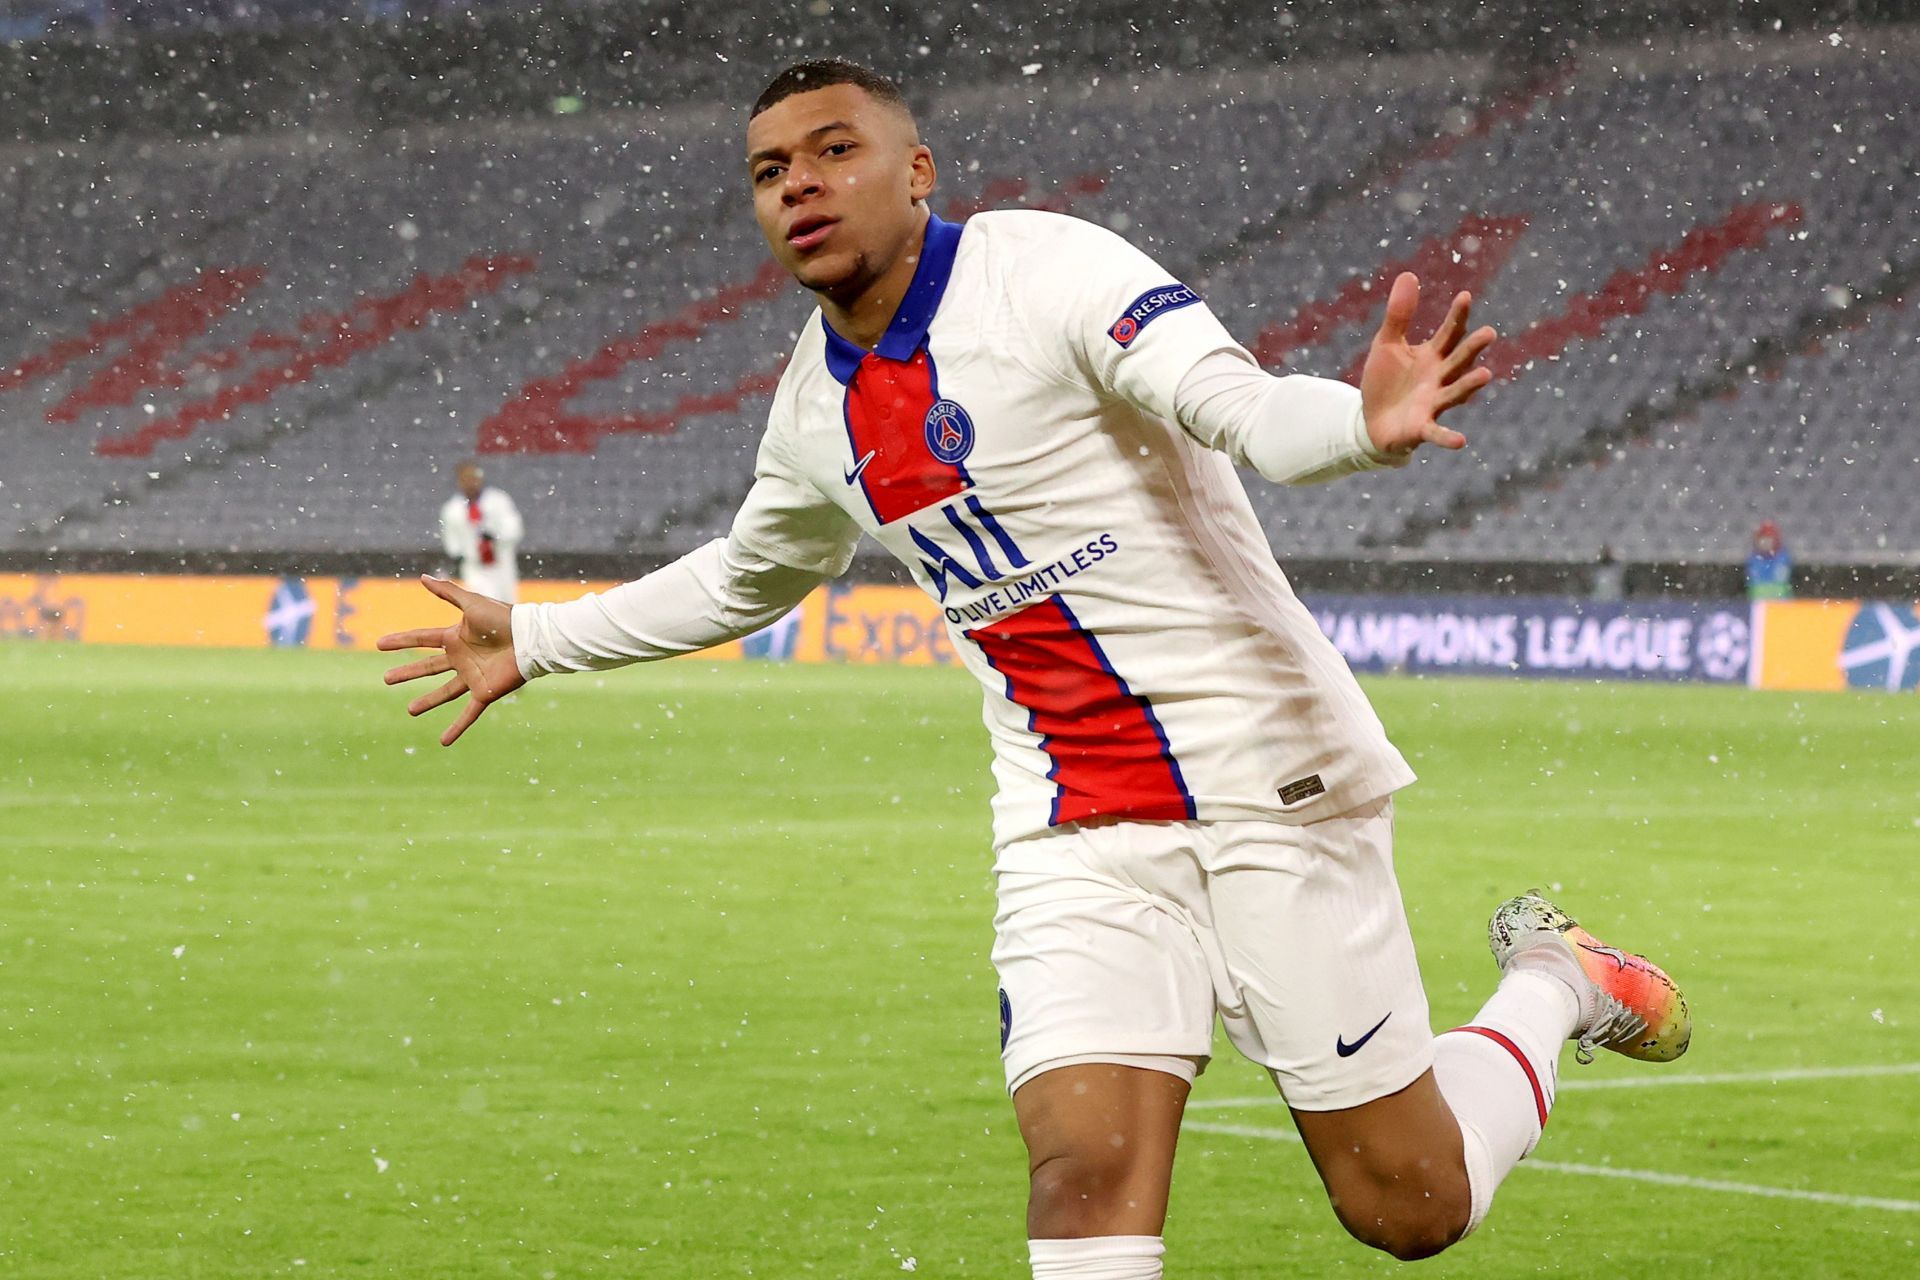 Mbappe has won 10 French domestic titles with PSG including three Ligue 1 titles